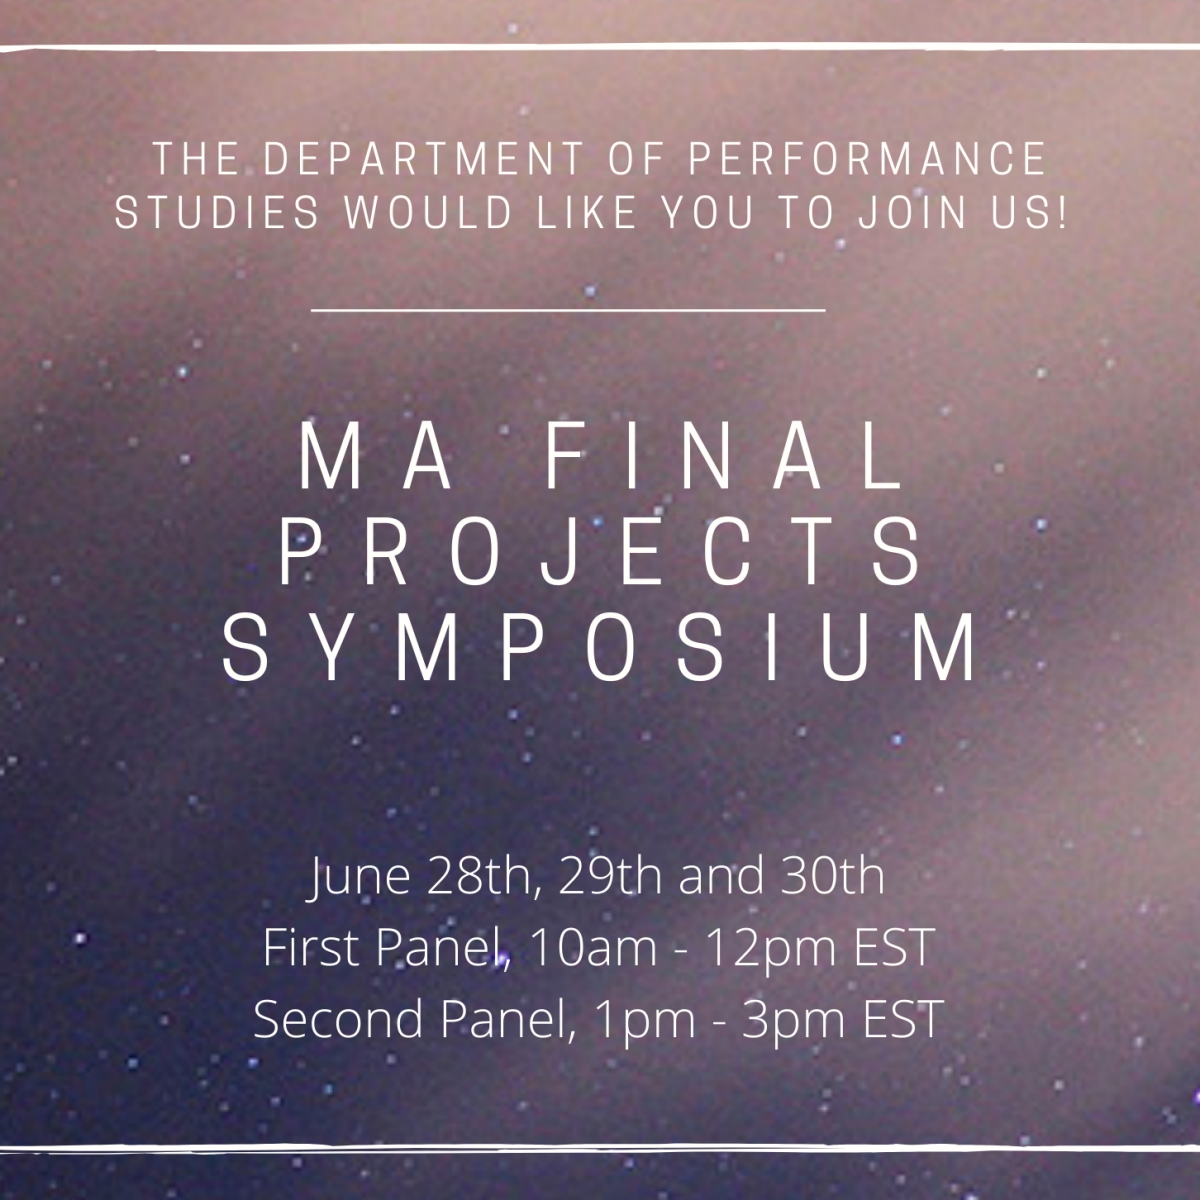 MA Final Projects Symposium